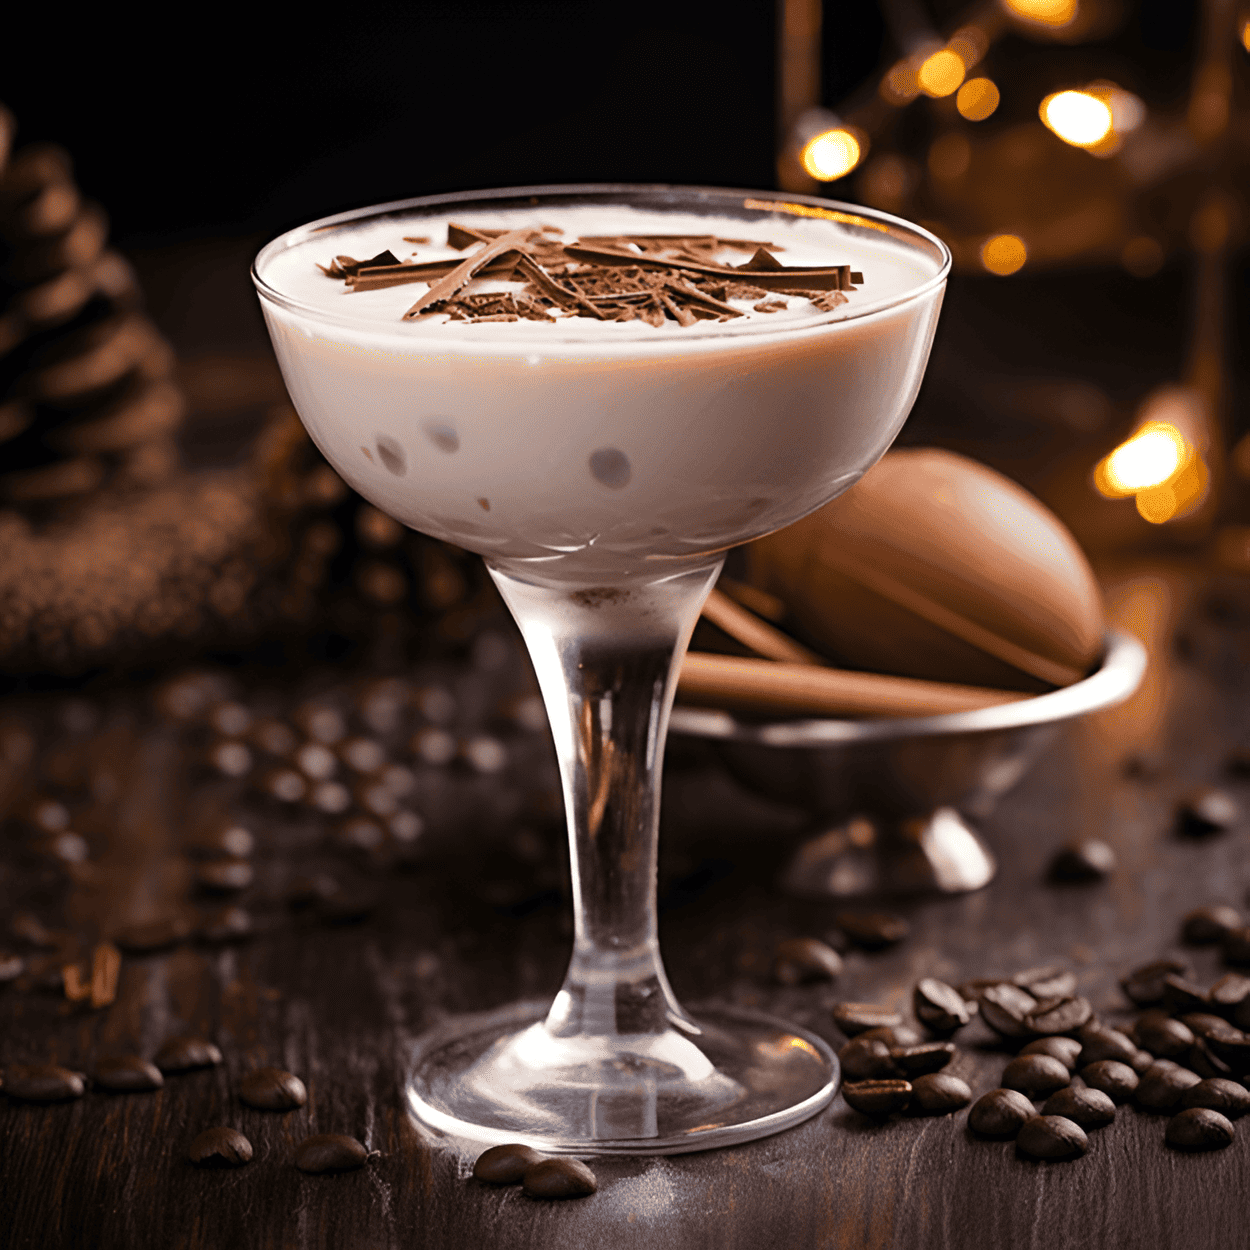 Chocolate White Russian Cocktail Recipe - The Chocolate White Russian is a sweet, creamy, and indulgent cocktail. The rich flavor of chocolate is perfectly balanced with the smoothness of the vodka and the creaminess of the cream. The taste is reminiscent of a decadent dessert, with a slight kick from the alcohol.